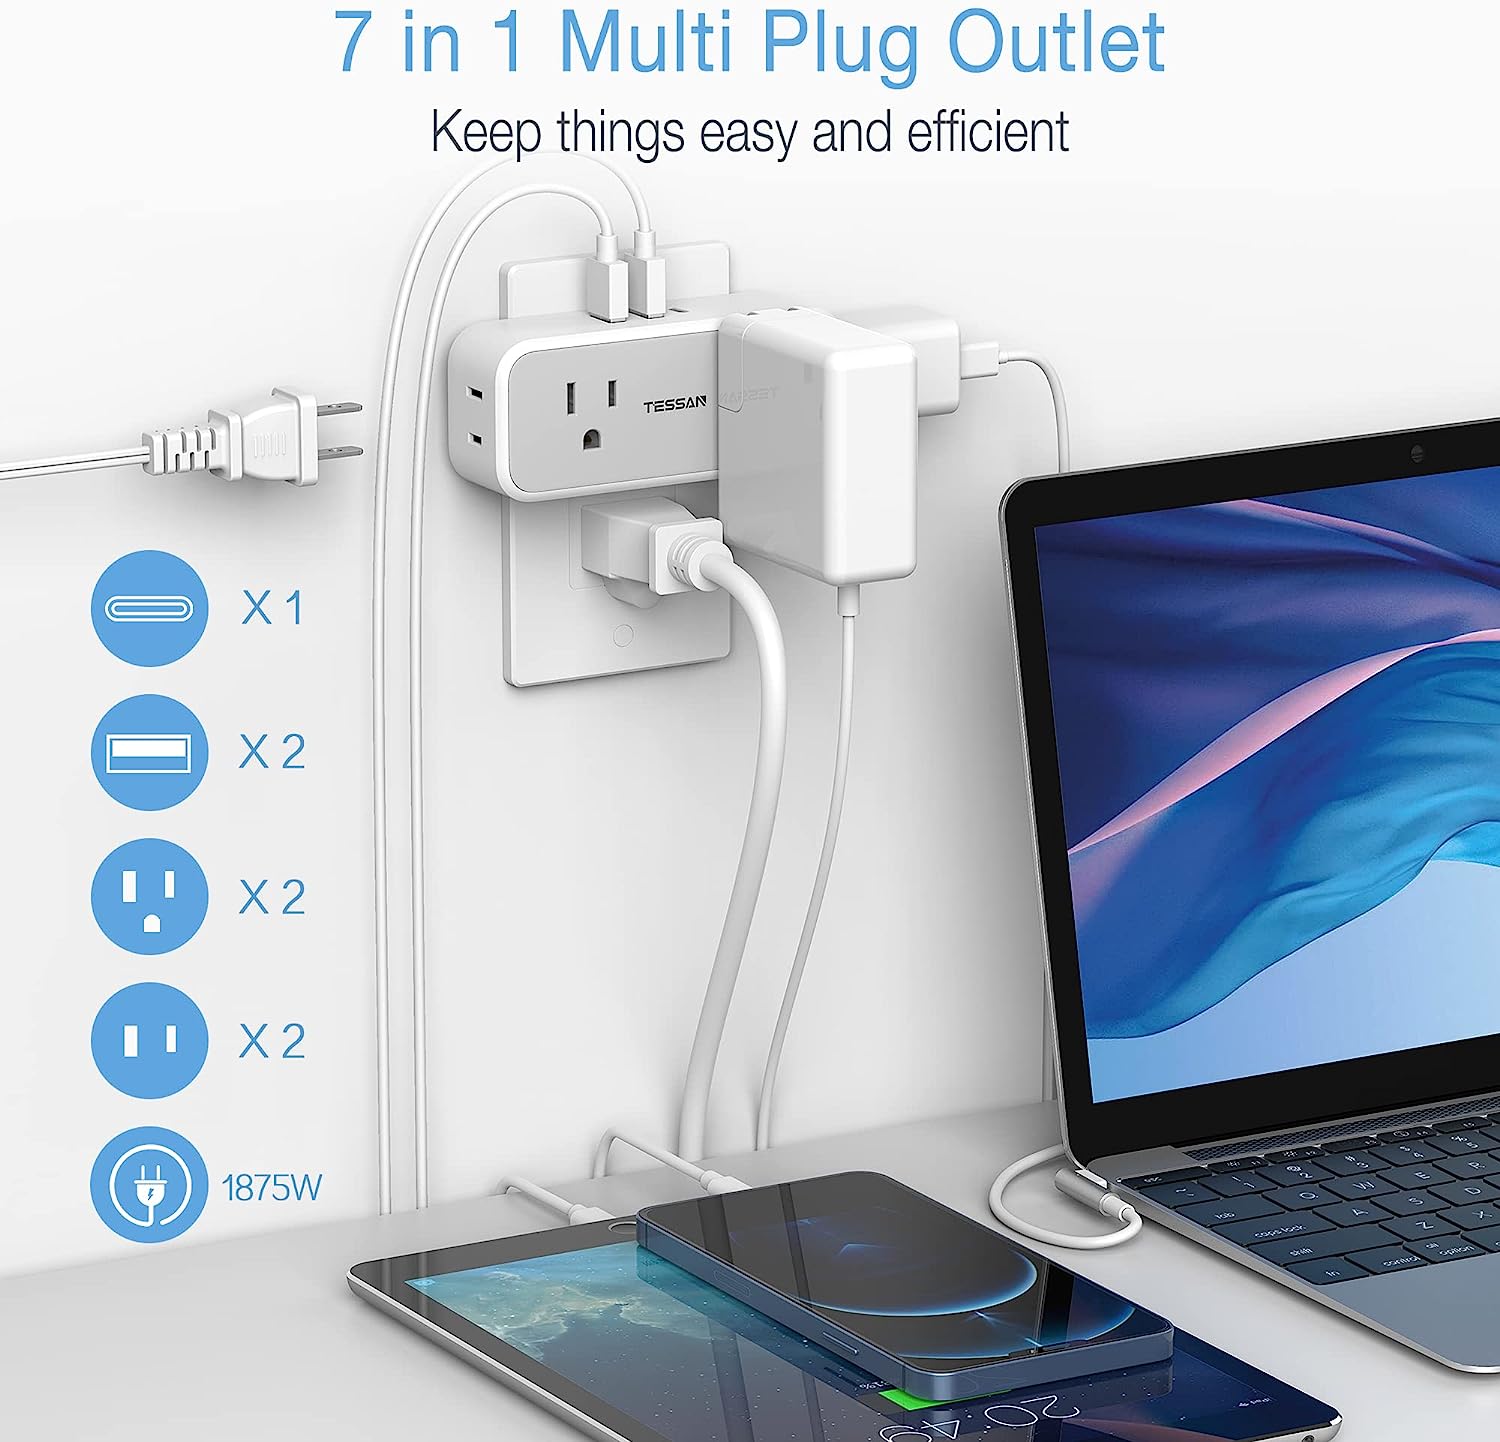 TESSAN USB Outlet Extender with 4 AC Outlets 2 USB A Ports 1 USB C Port